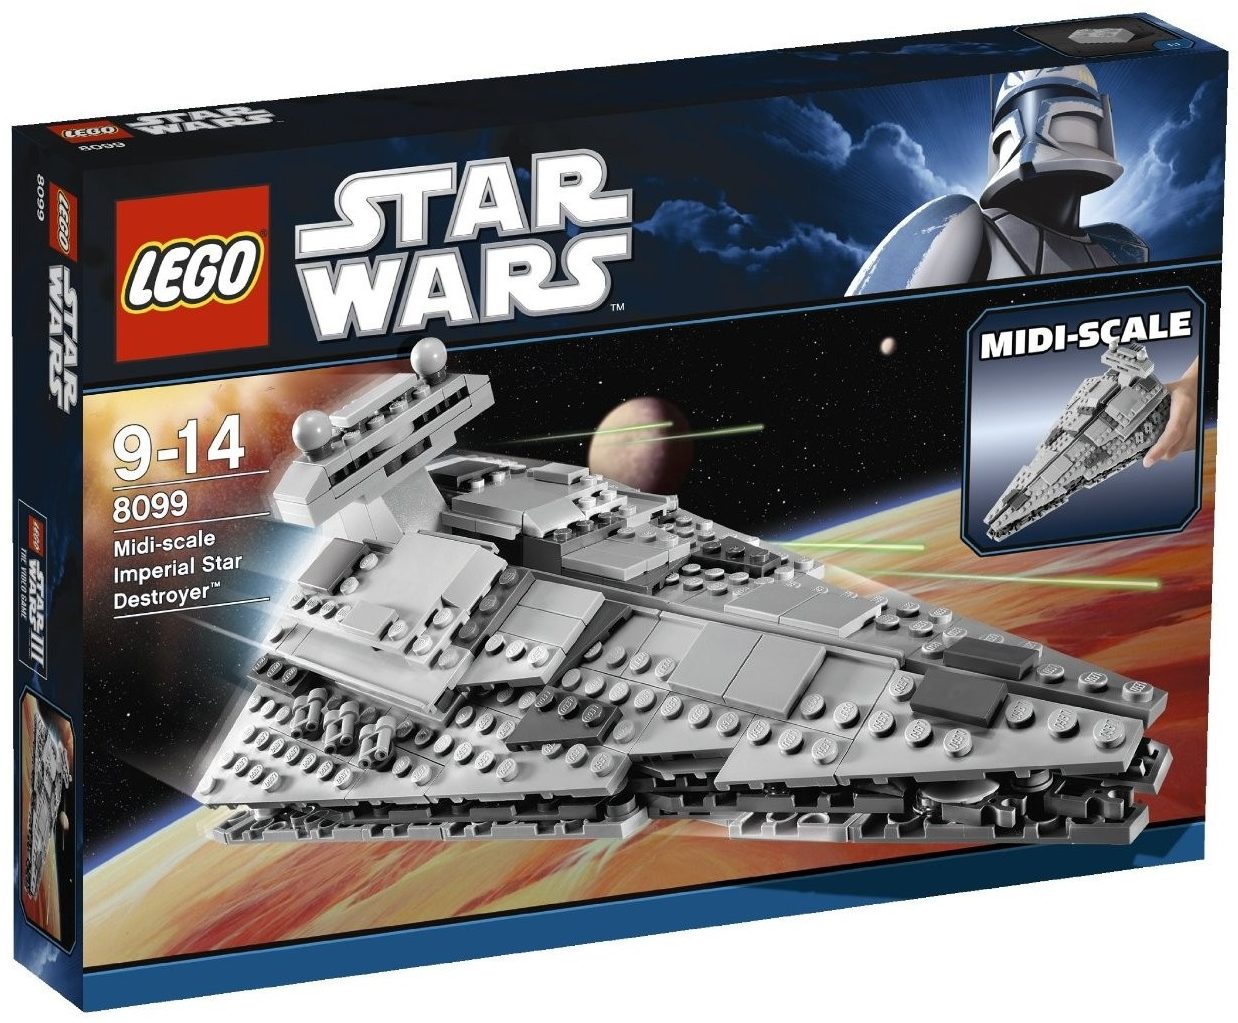 Midi-Scale Imperial Star Destroyer